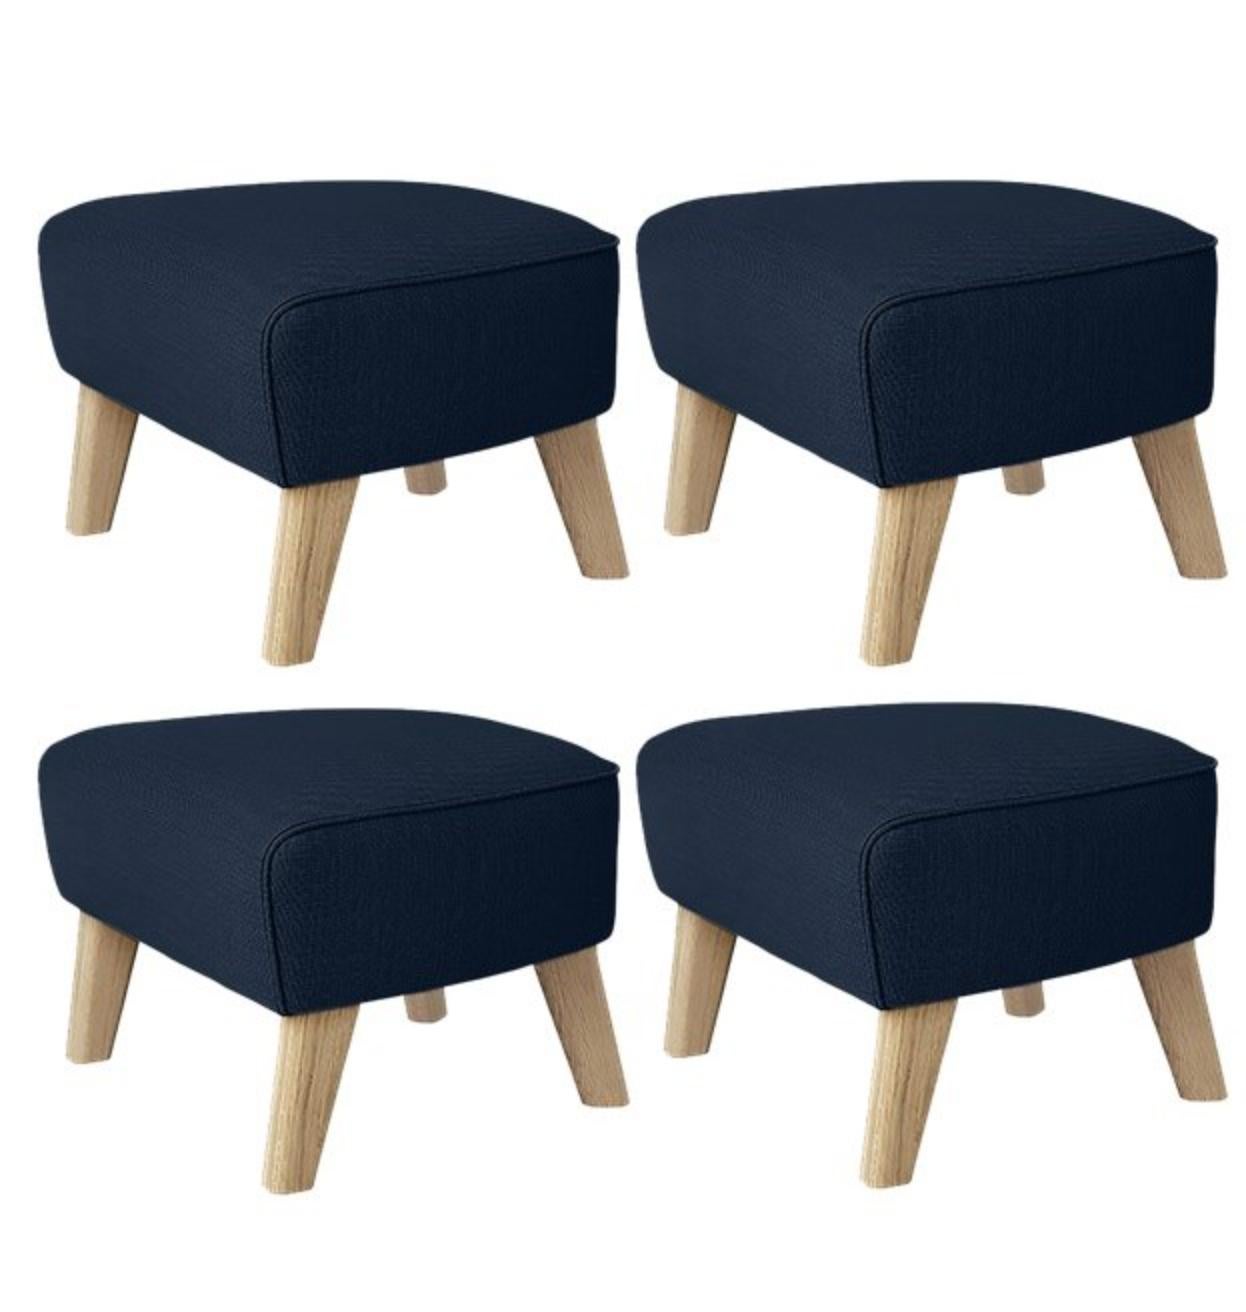 Set of 4 blue and natural oak Sahco zero footstool by Lassen
Dimensions: w 56 x d 58 x h 40 cm 
Materials: Textile
Also available: Other colors available

The my own chair footstool has been designed in the same spirit as Flemming Lassen’s